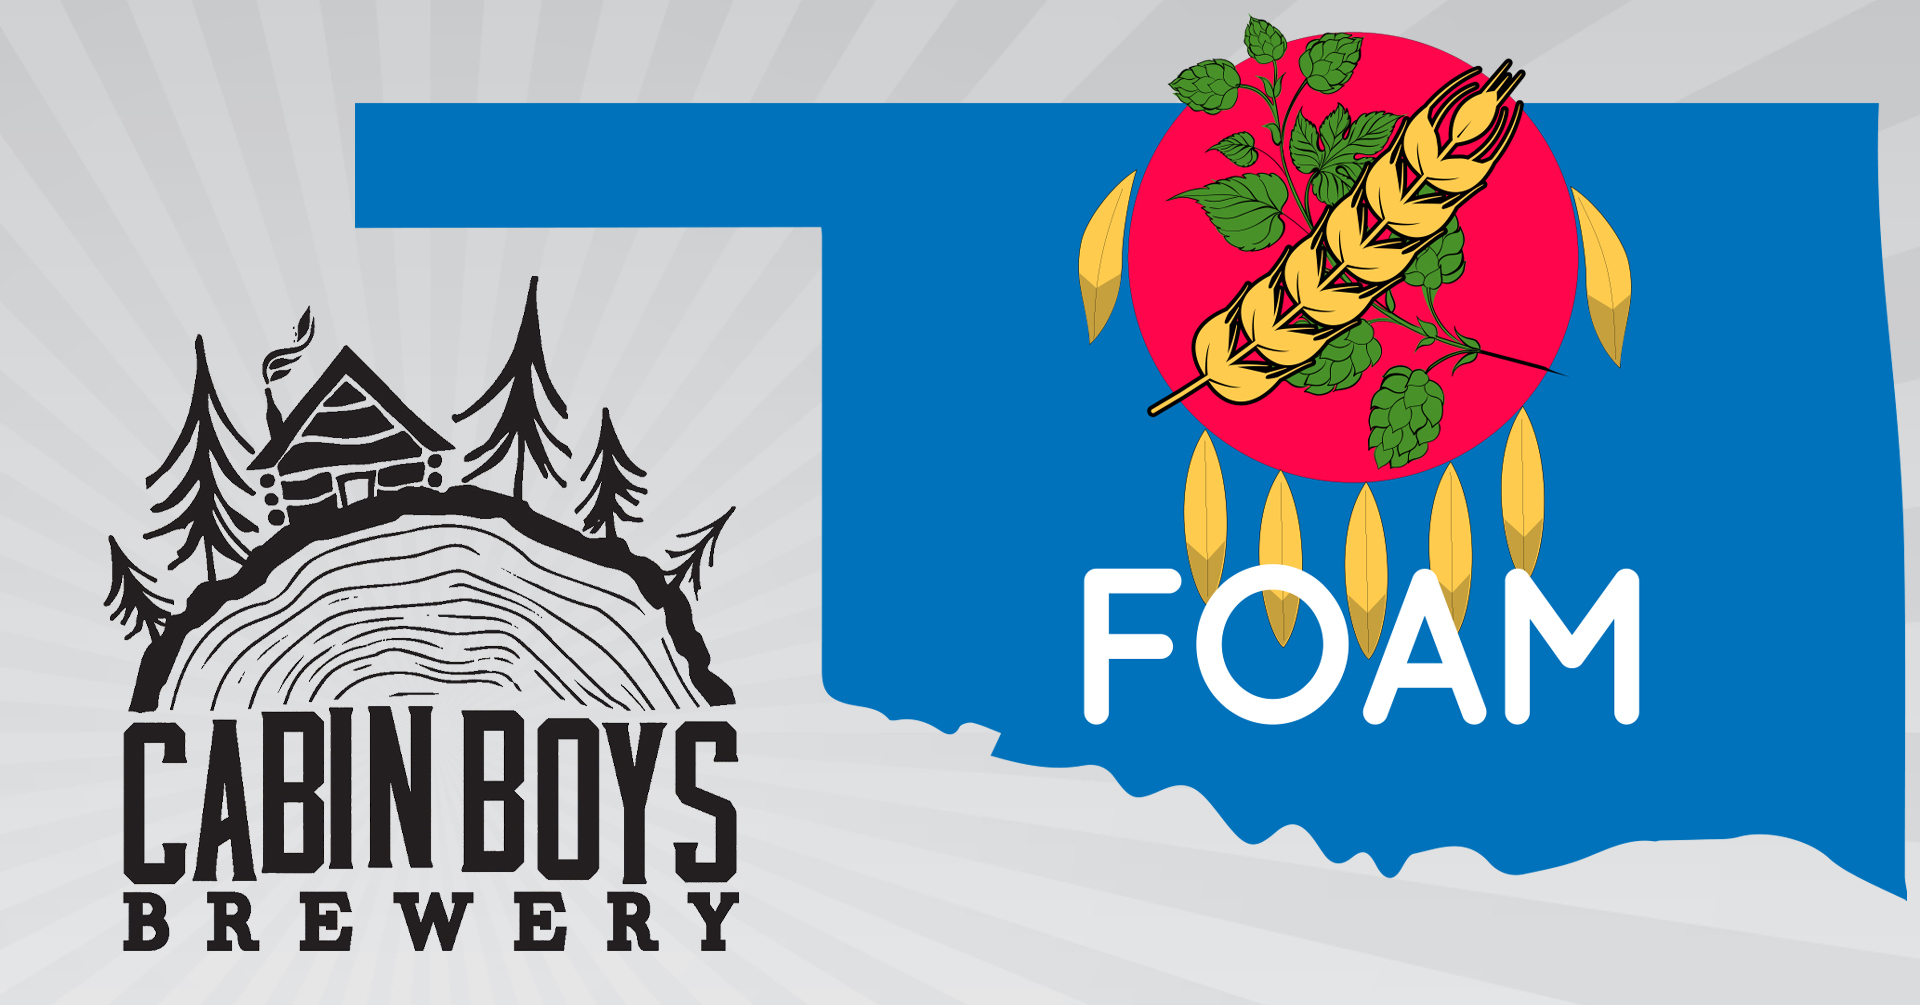 June Pub Meetup - Cabin Boys Brewery - Fellowship of Oklahoma Ale Makers